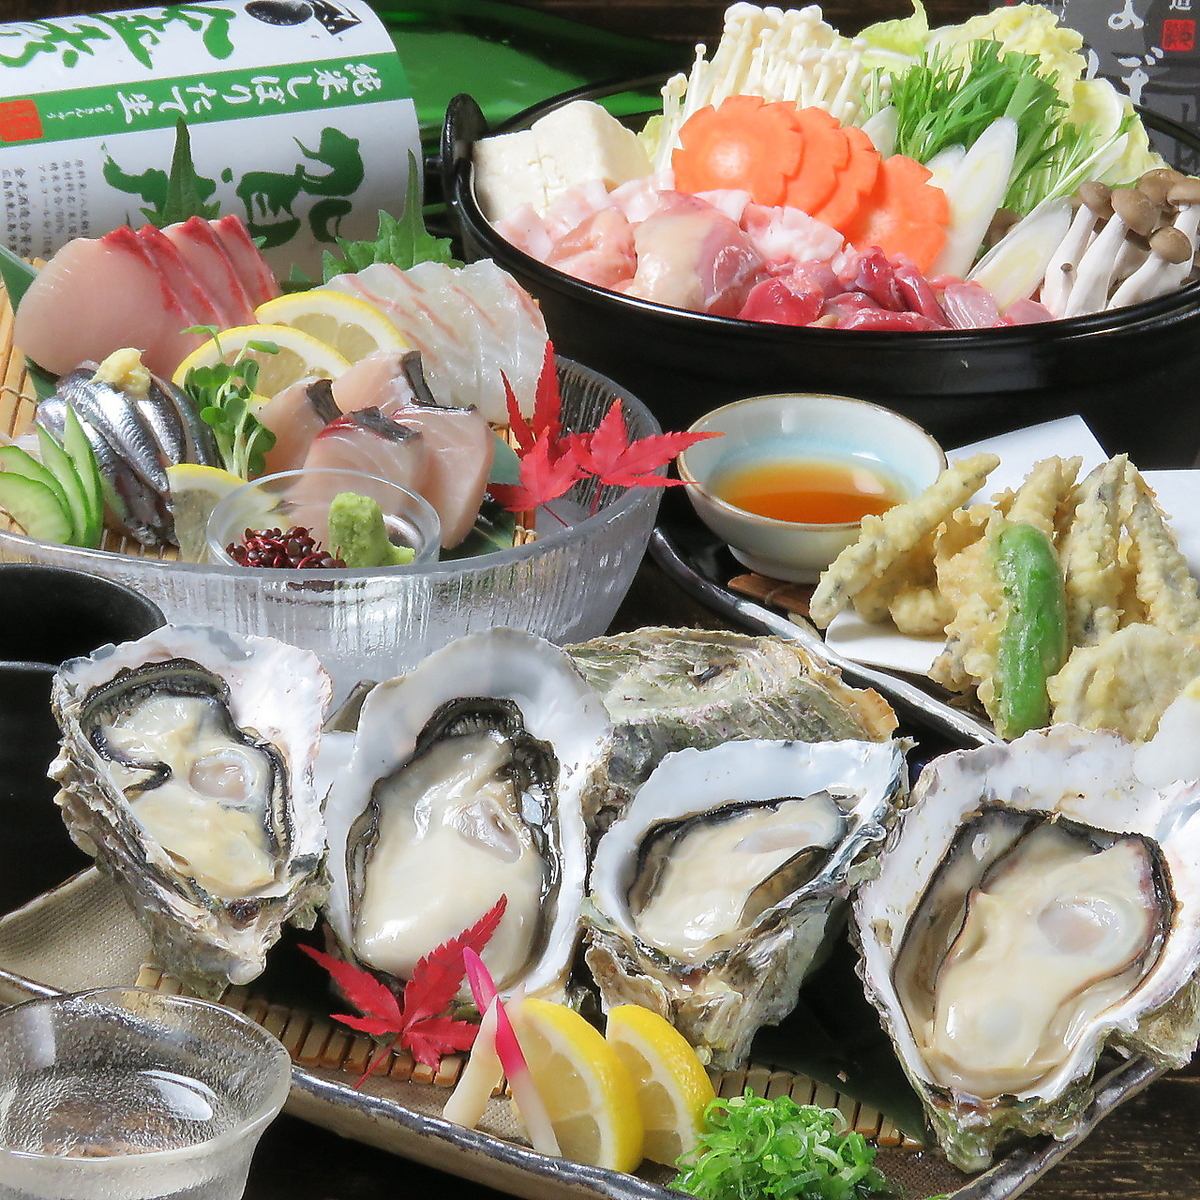 Enjoy Hiroshima ingredients such as oysters, conger eel, small sardines, koune, and Hiroshima beef!